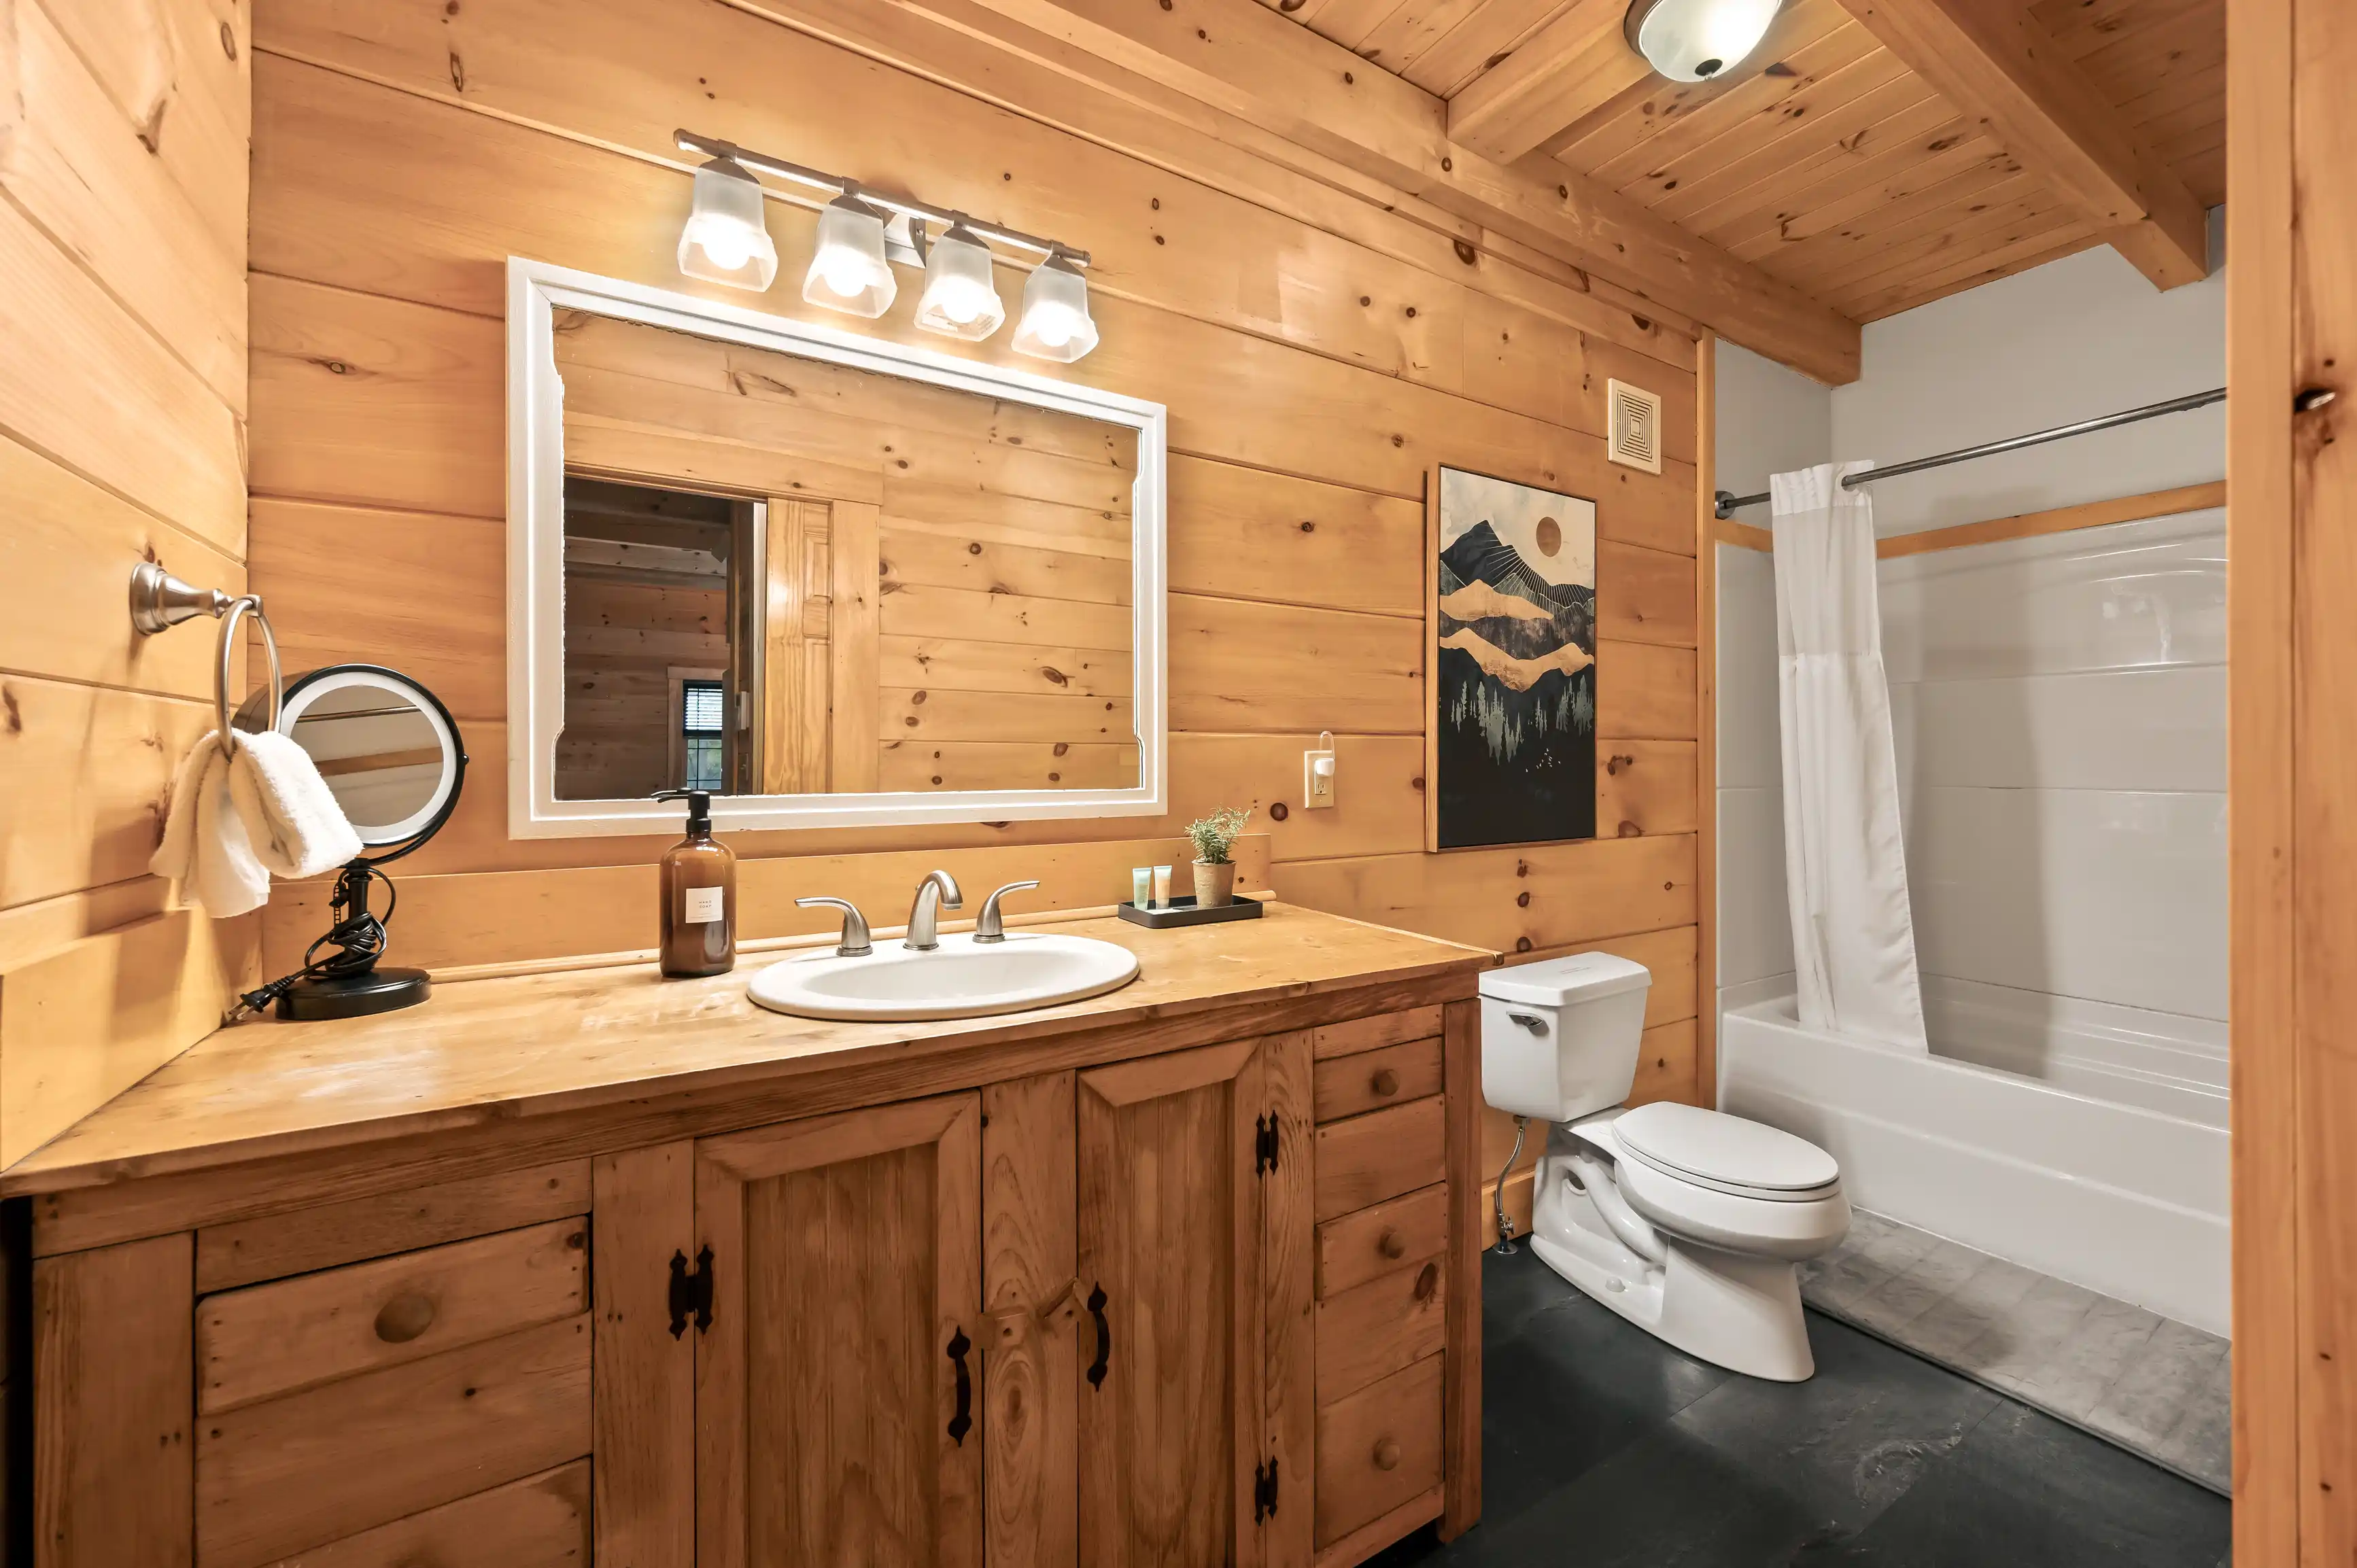 Rustic bathroom interior with wooden walls and cabinets, featuring a large mirror, double sink vanity, wall-mounted lights, magnifying mirror, toilet, and shower with a white curtain. A mountain landscape picture hangs on the wall.